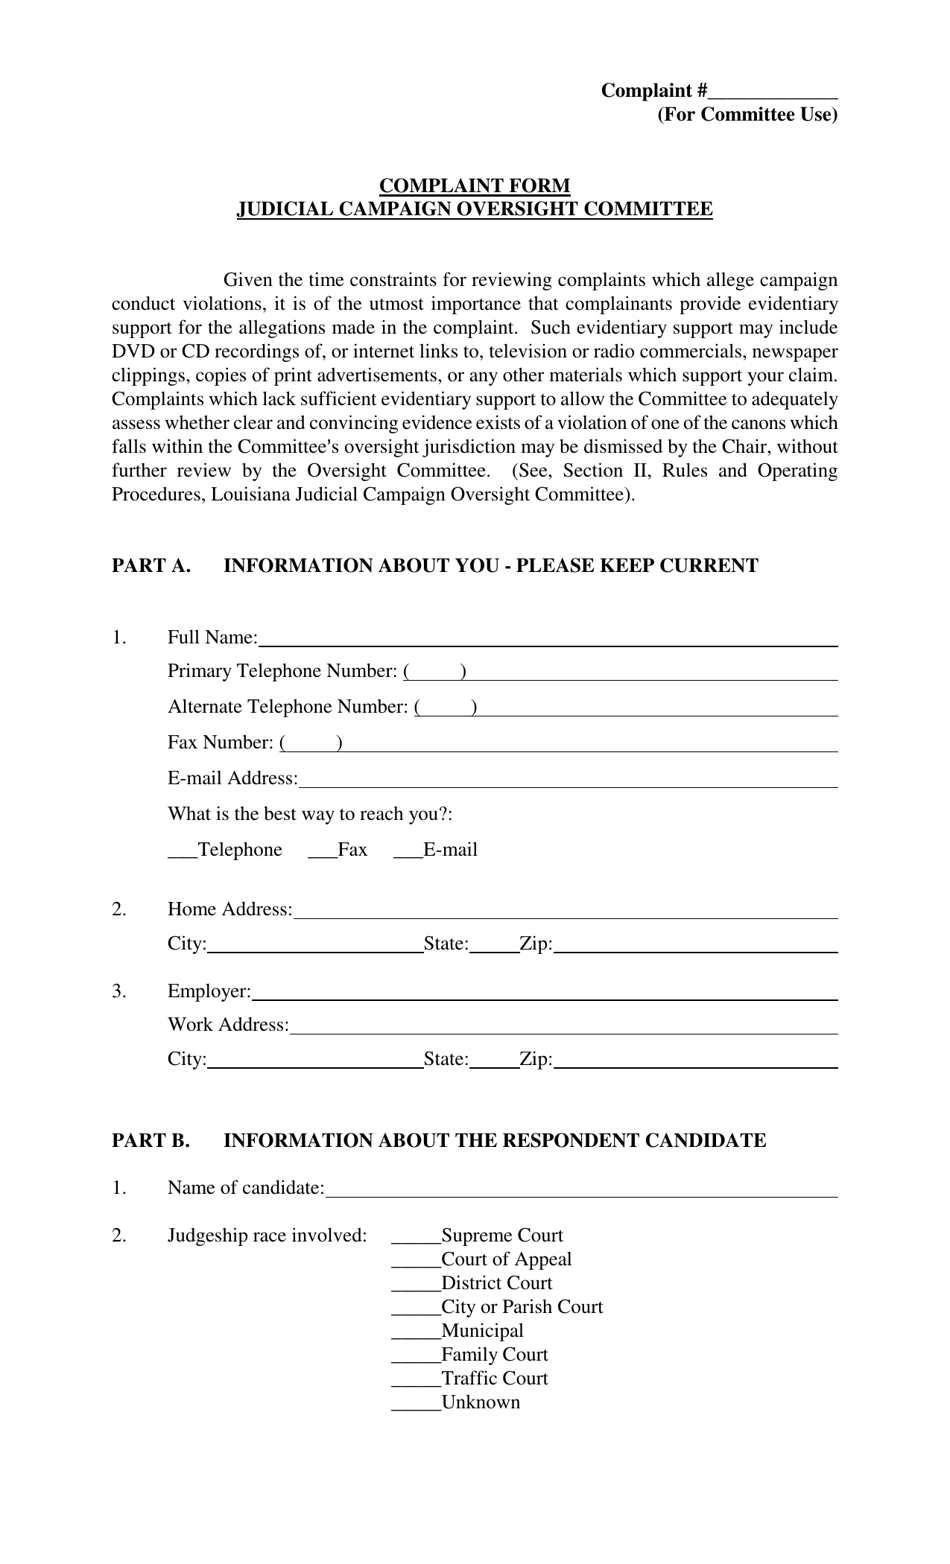 Complaint Form - Judicial Campaign Oversight Committee - Louisiana, Page 1